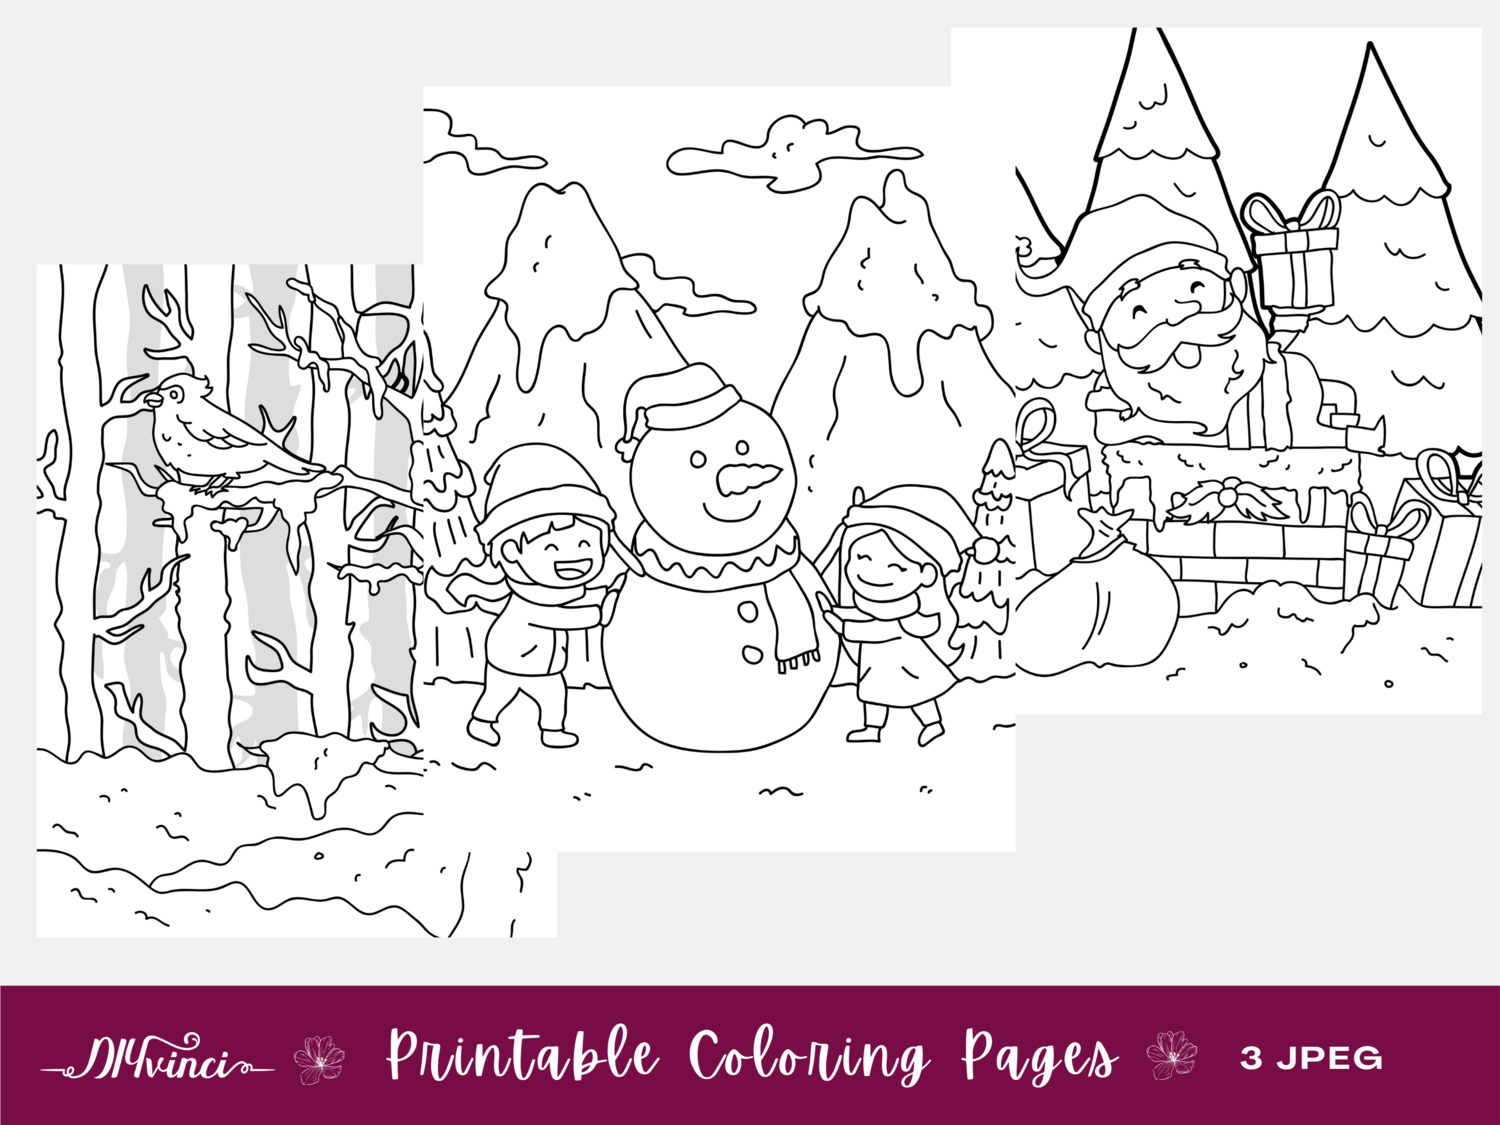 Three Printable Christmas Coloring Pages - JPEG - Personal & Commercial Use